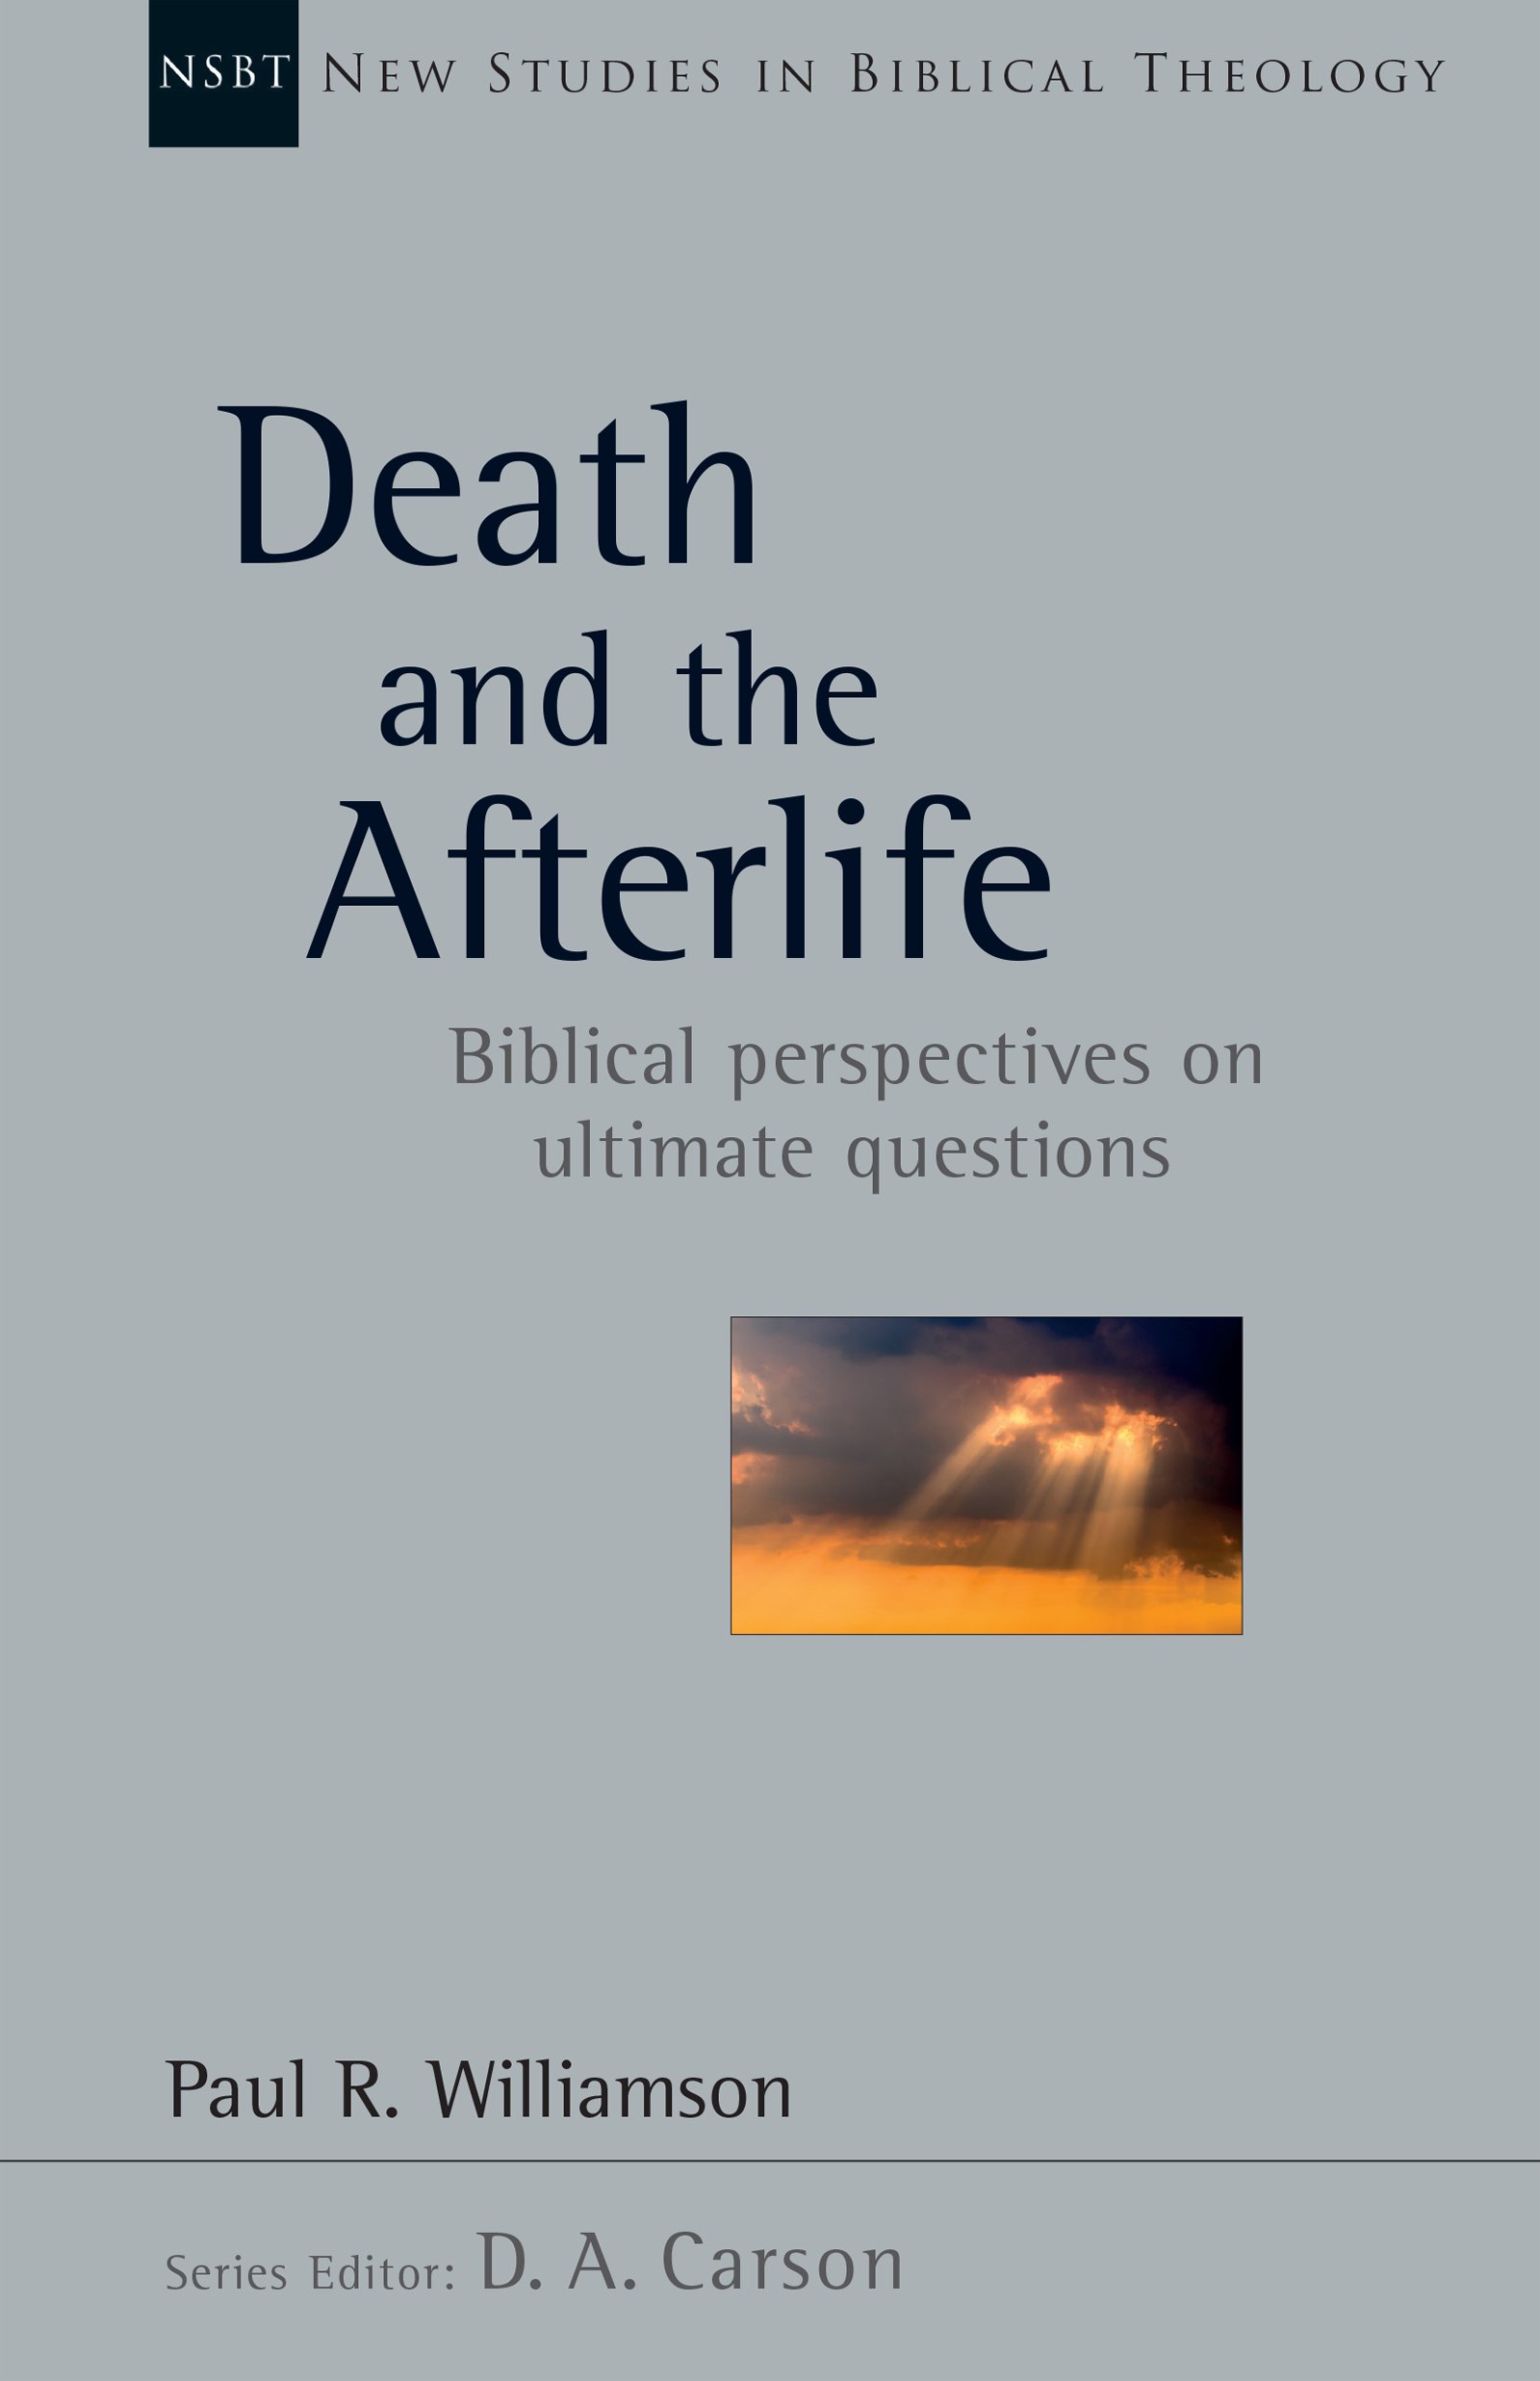 Book Notice: DEATH AND THE AFTERLIFE: BIBLICAL PERSPECTIVES ON ULTIMATE QUESTIONS, by Paul R. Williamson